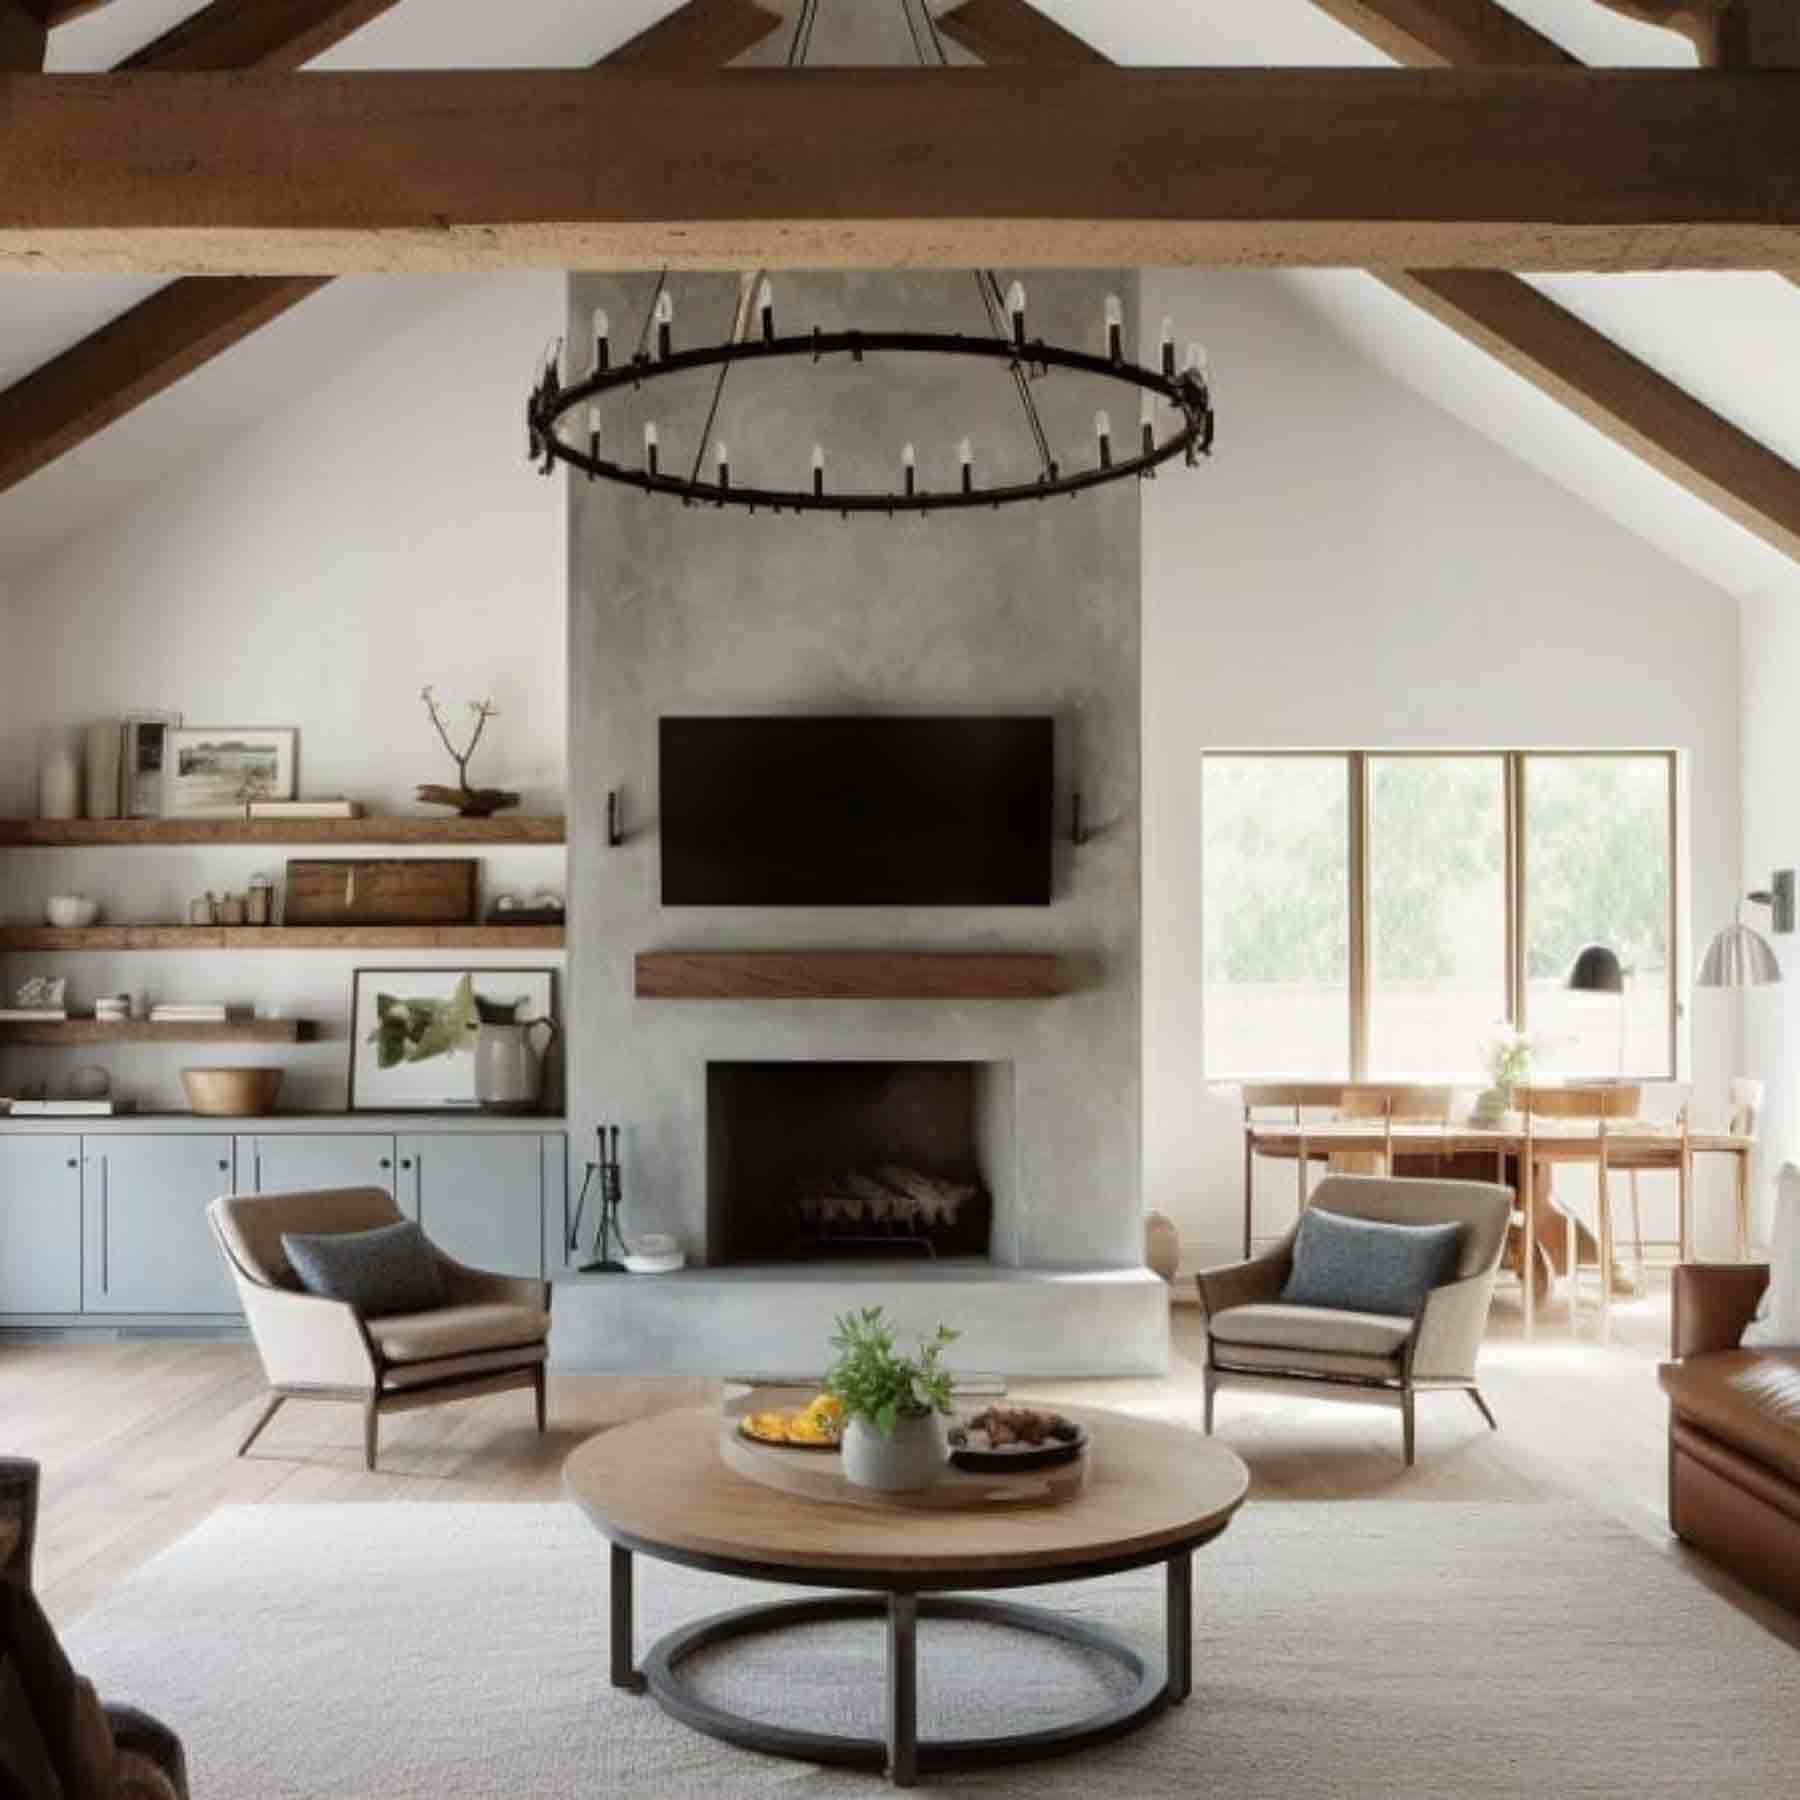 farmhouse style has become increasingly popular because of its timeless visual appeal and practicality